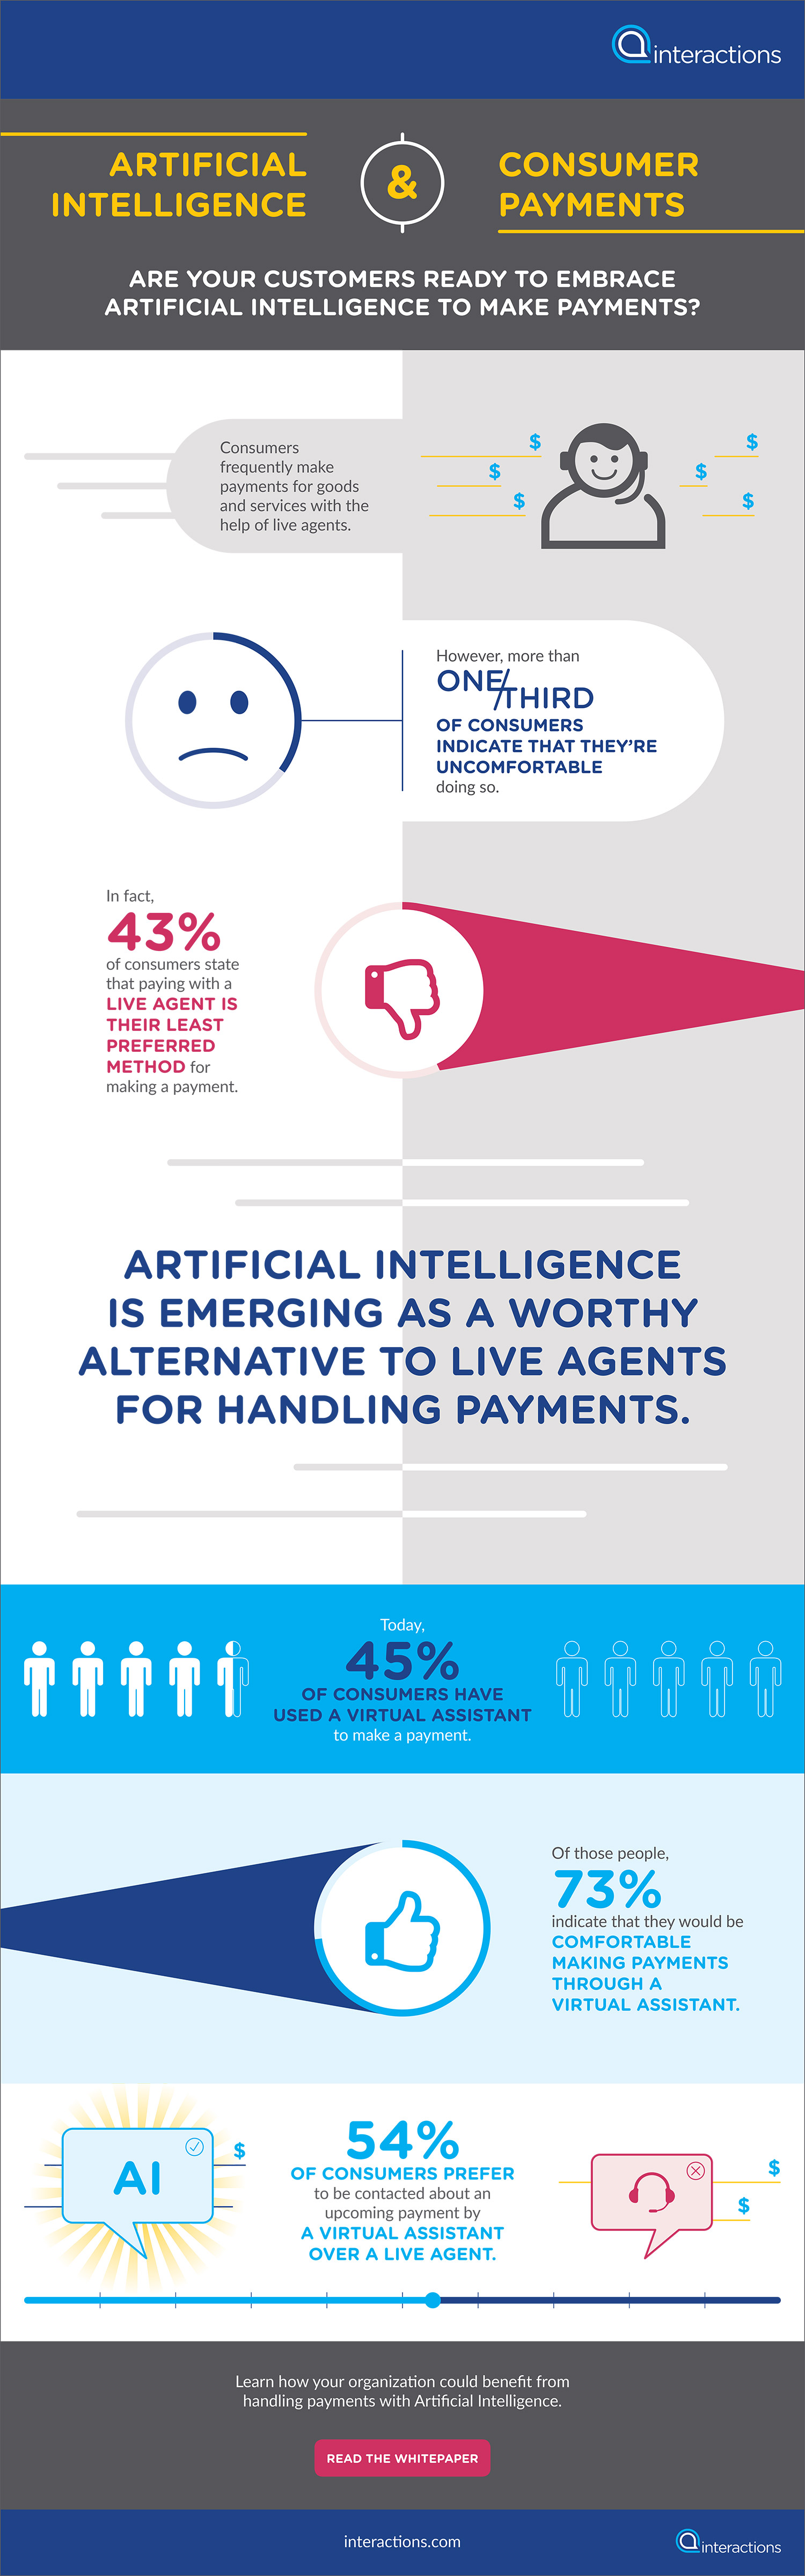 AI & Consumer Payments Infographic